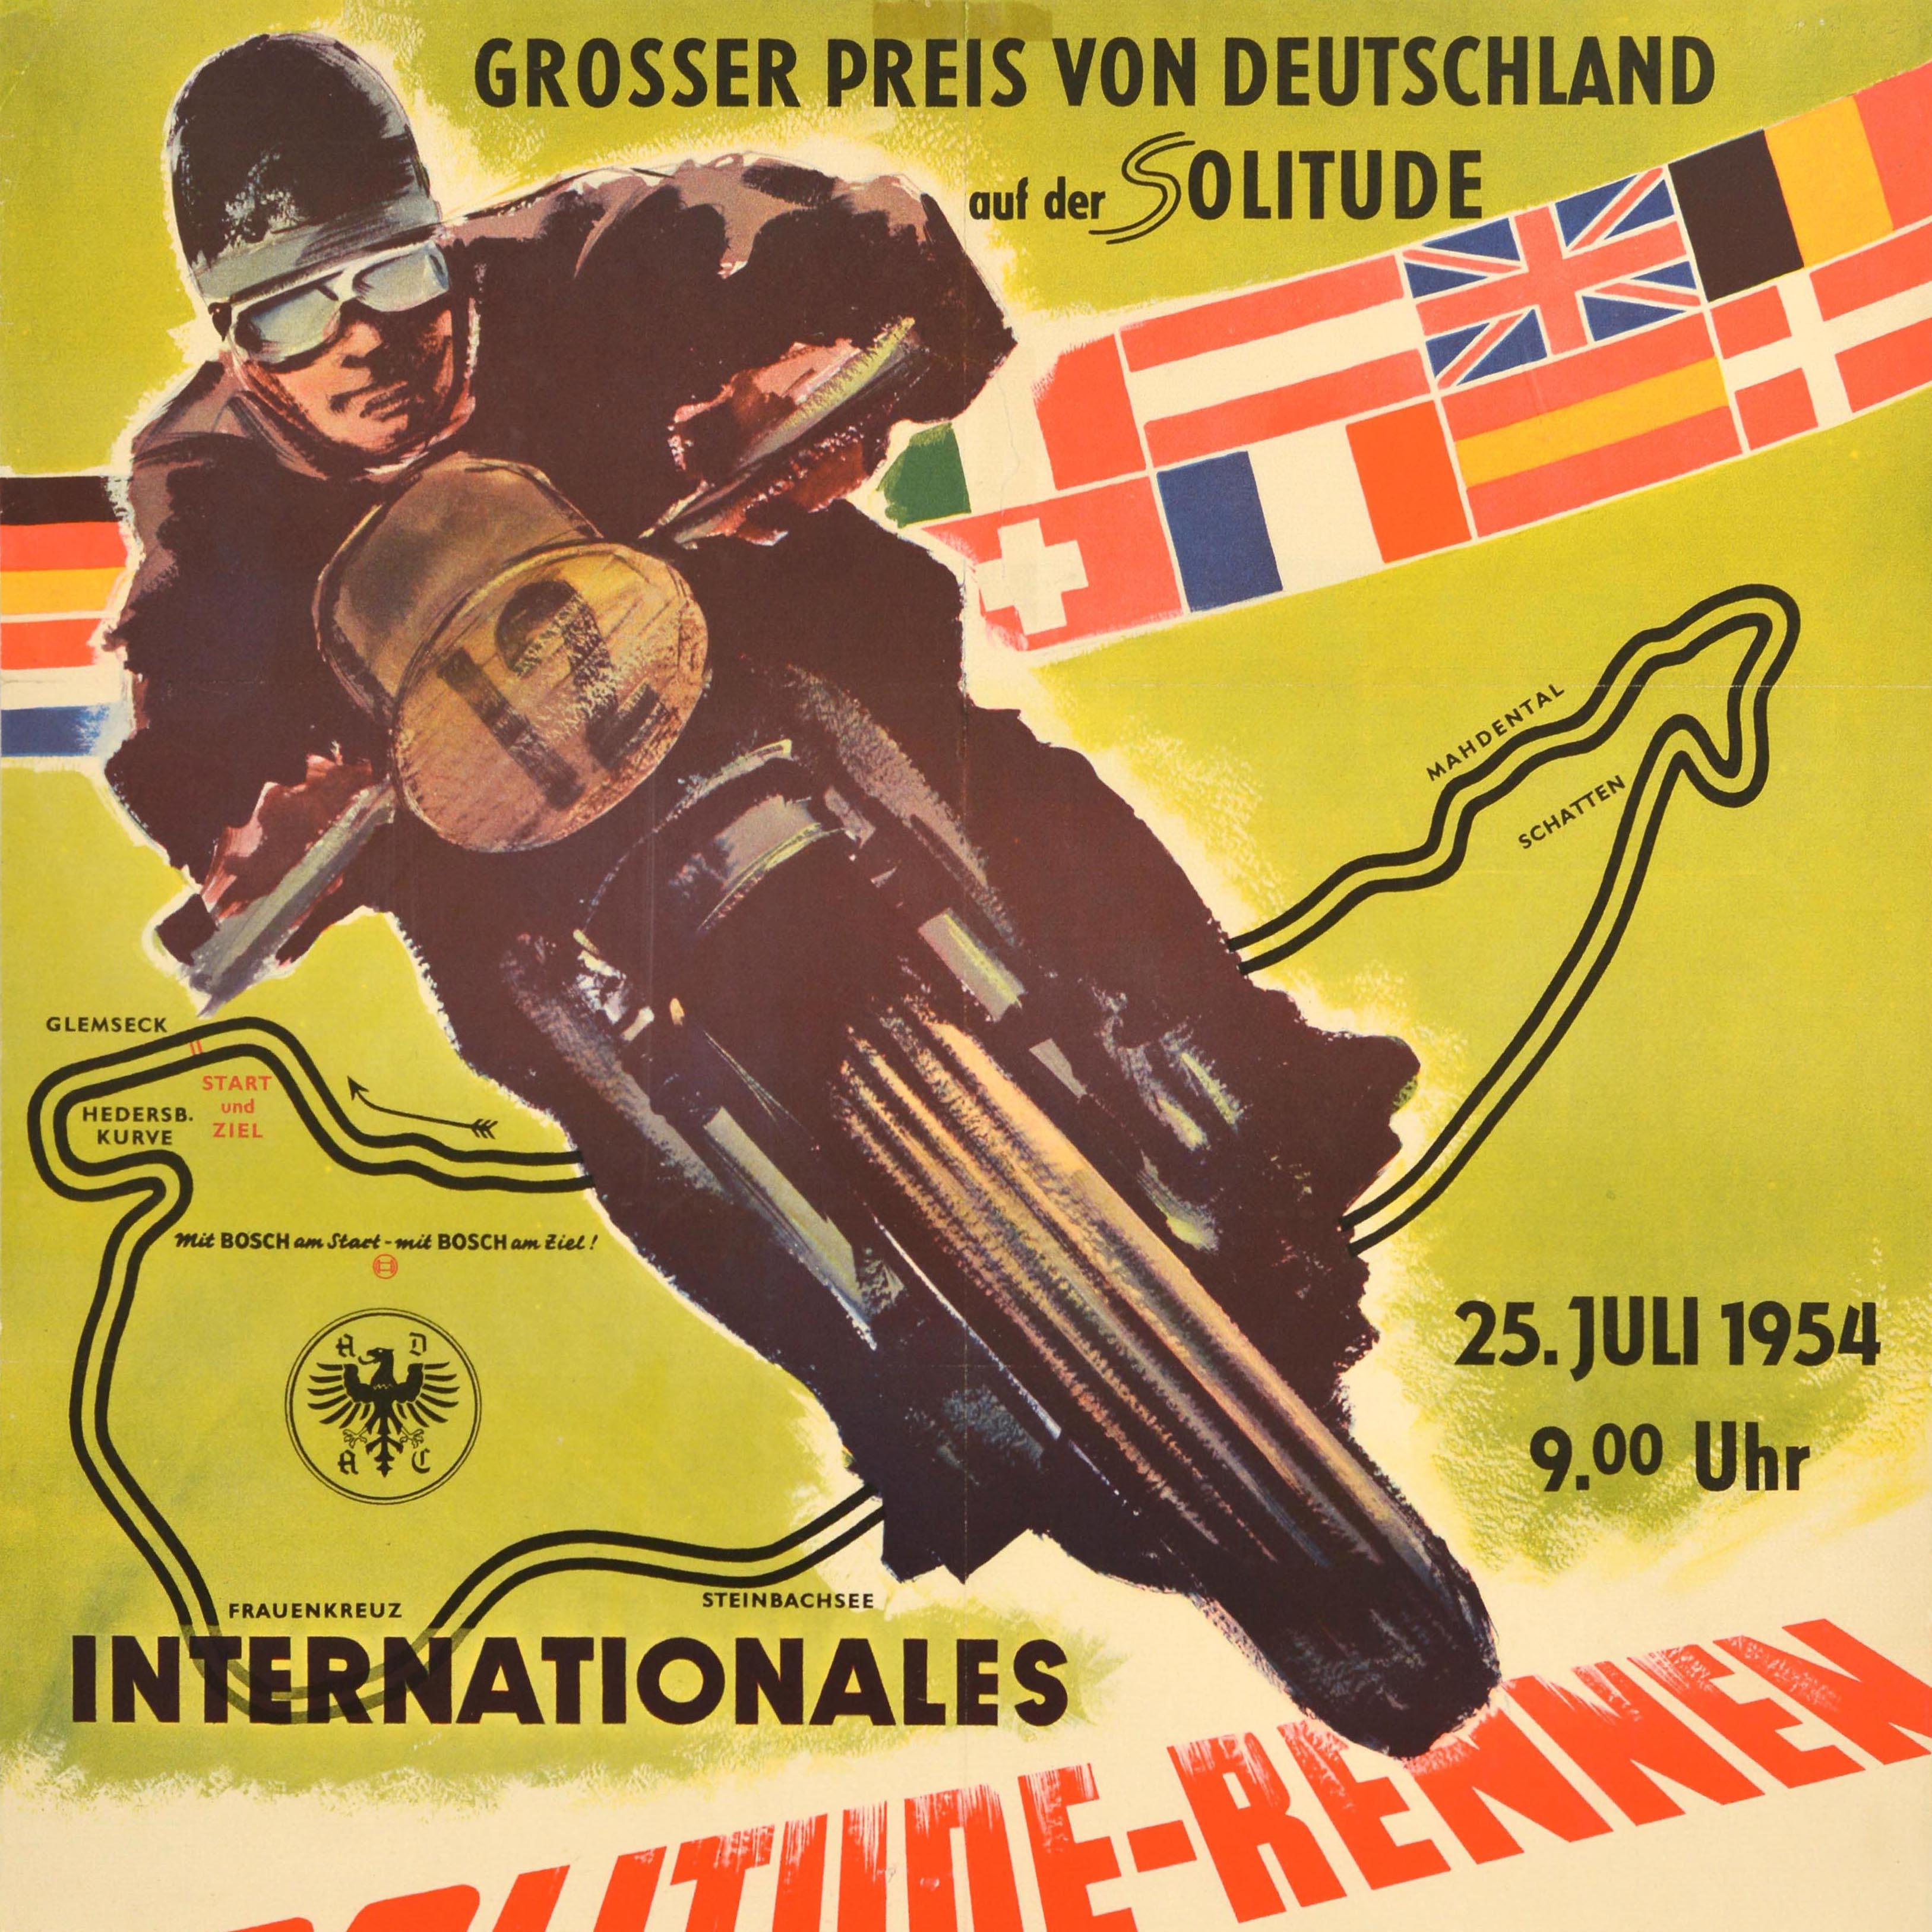 Original vintage sports poster for the German Grand Prix at the Solitude racetrack International race for motorcycles with and without sidecars 6th World Championship 25 July 1954 / Grosser Preis von Deutschland auf der Solitude Internationales